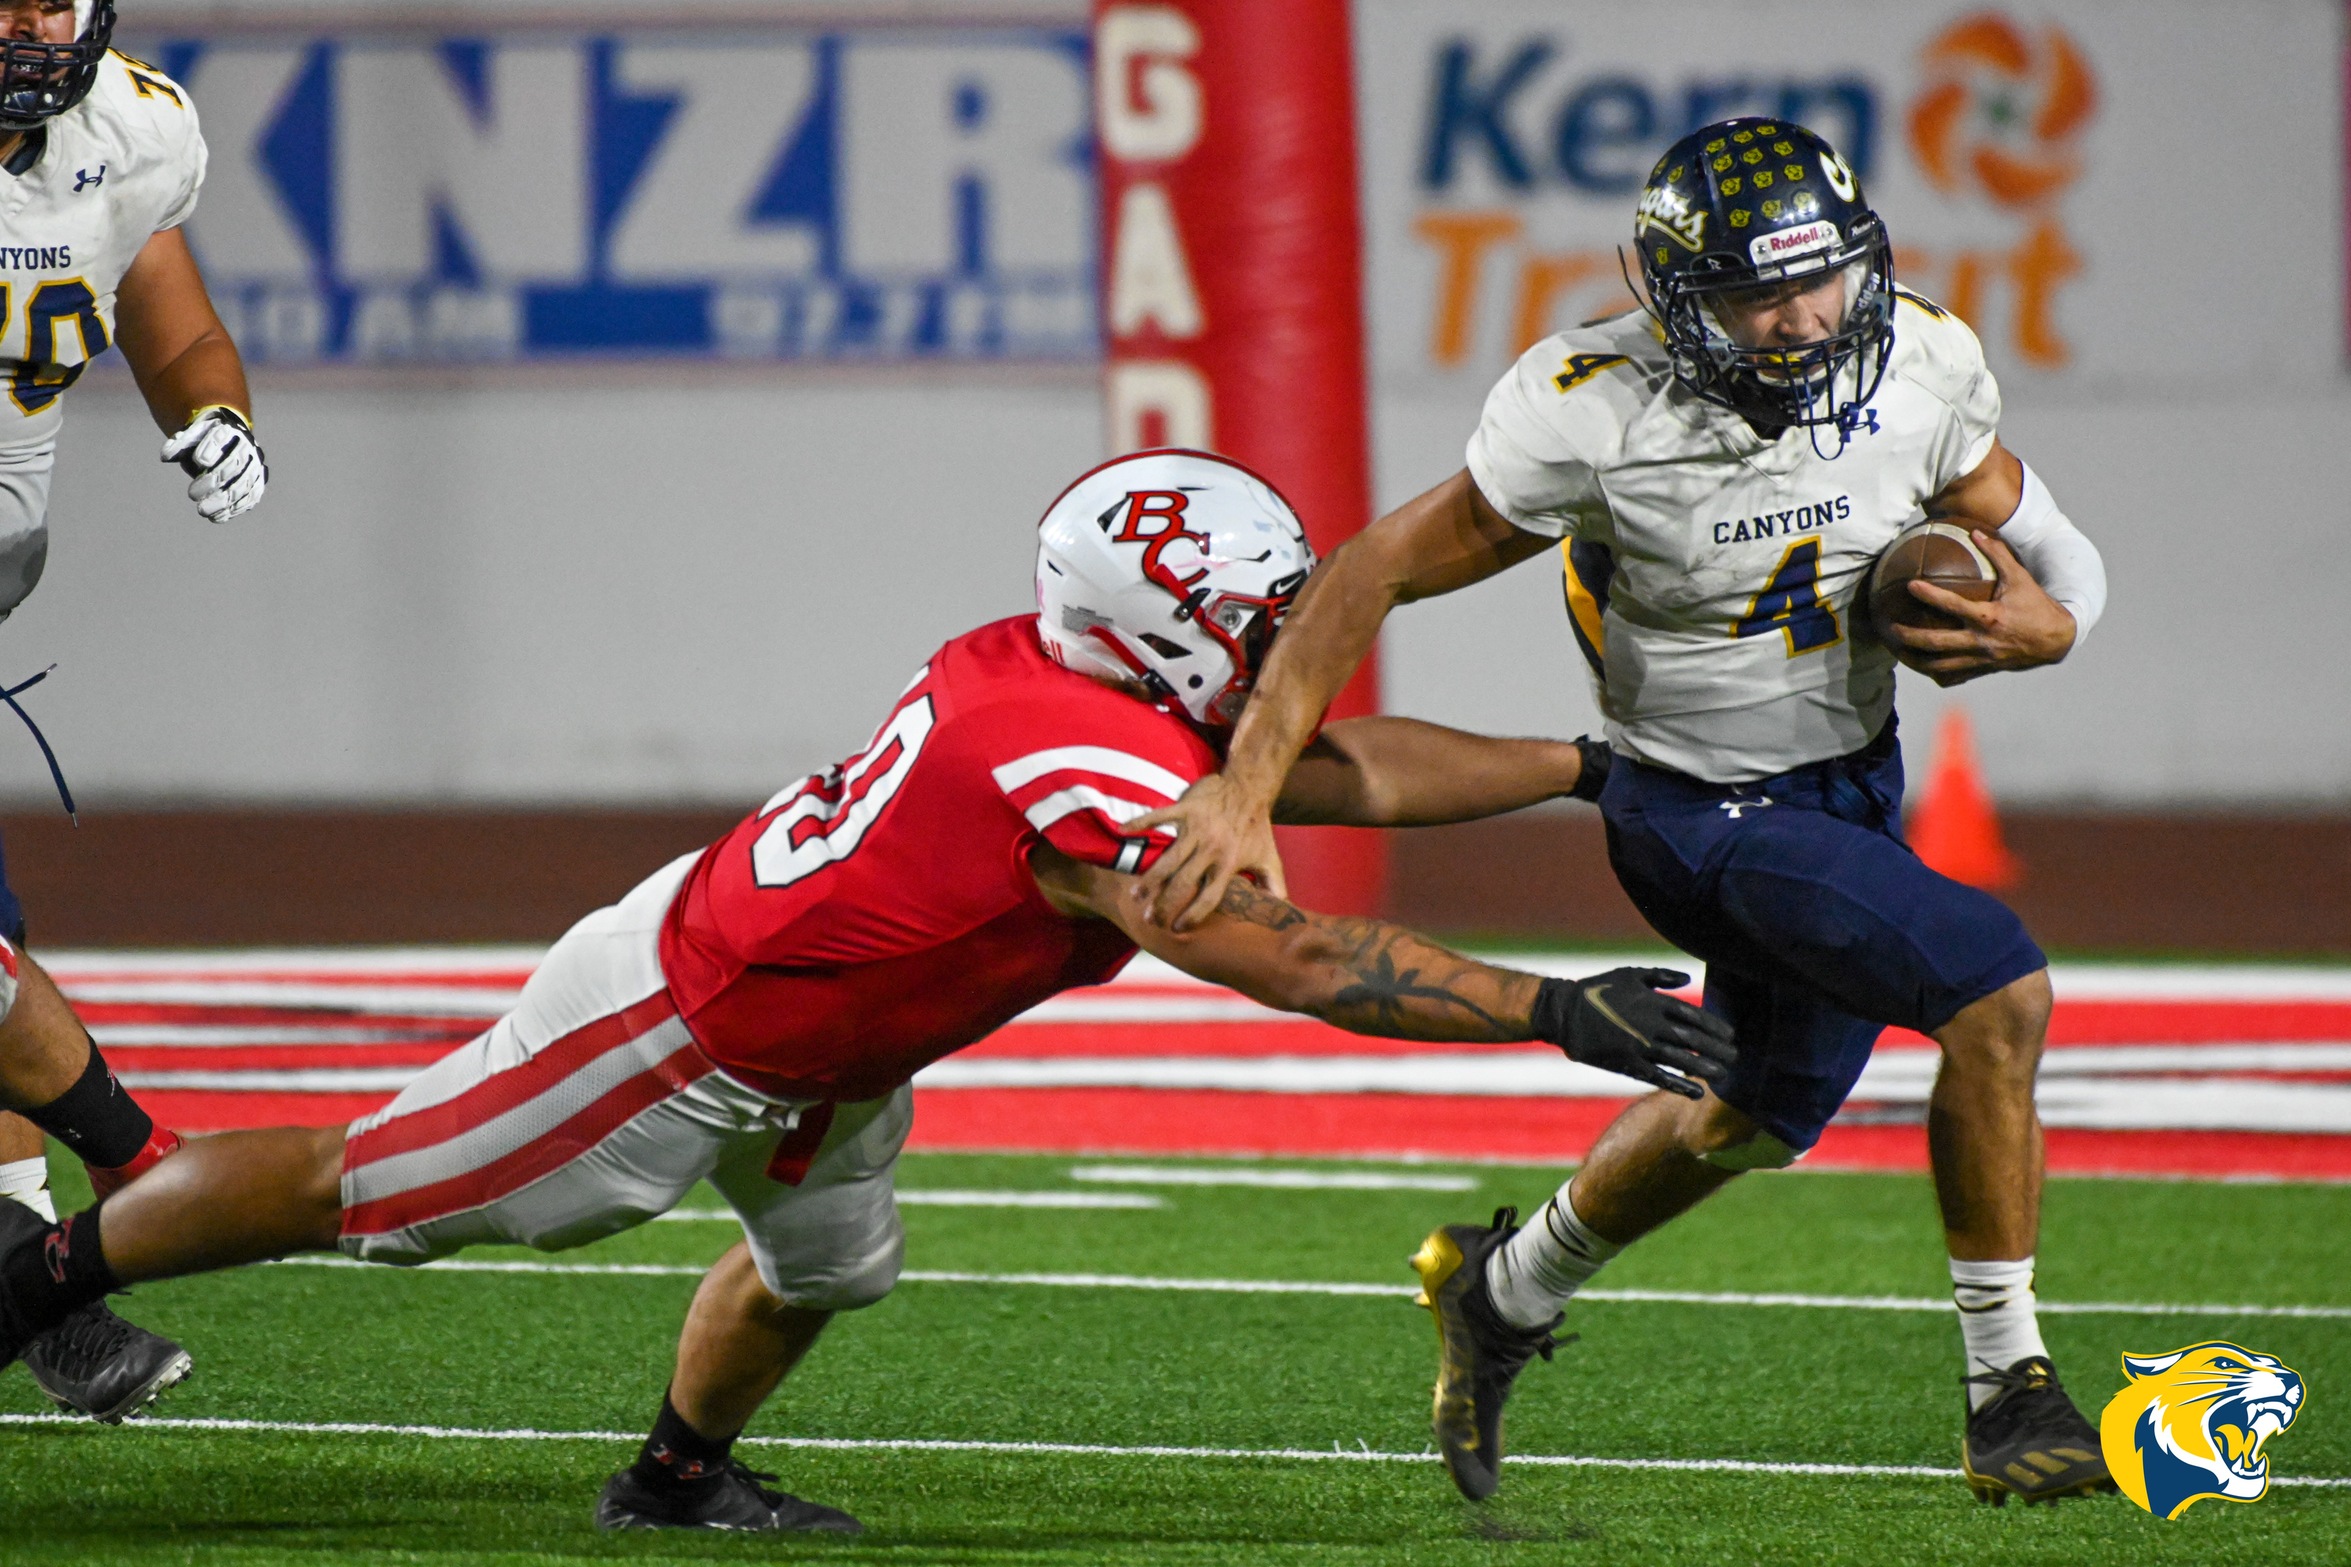 College of the Canyons football player Colton Doyle vs. Bakersfield College on Oct. 16, 2021.